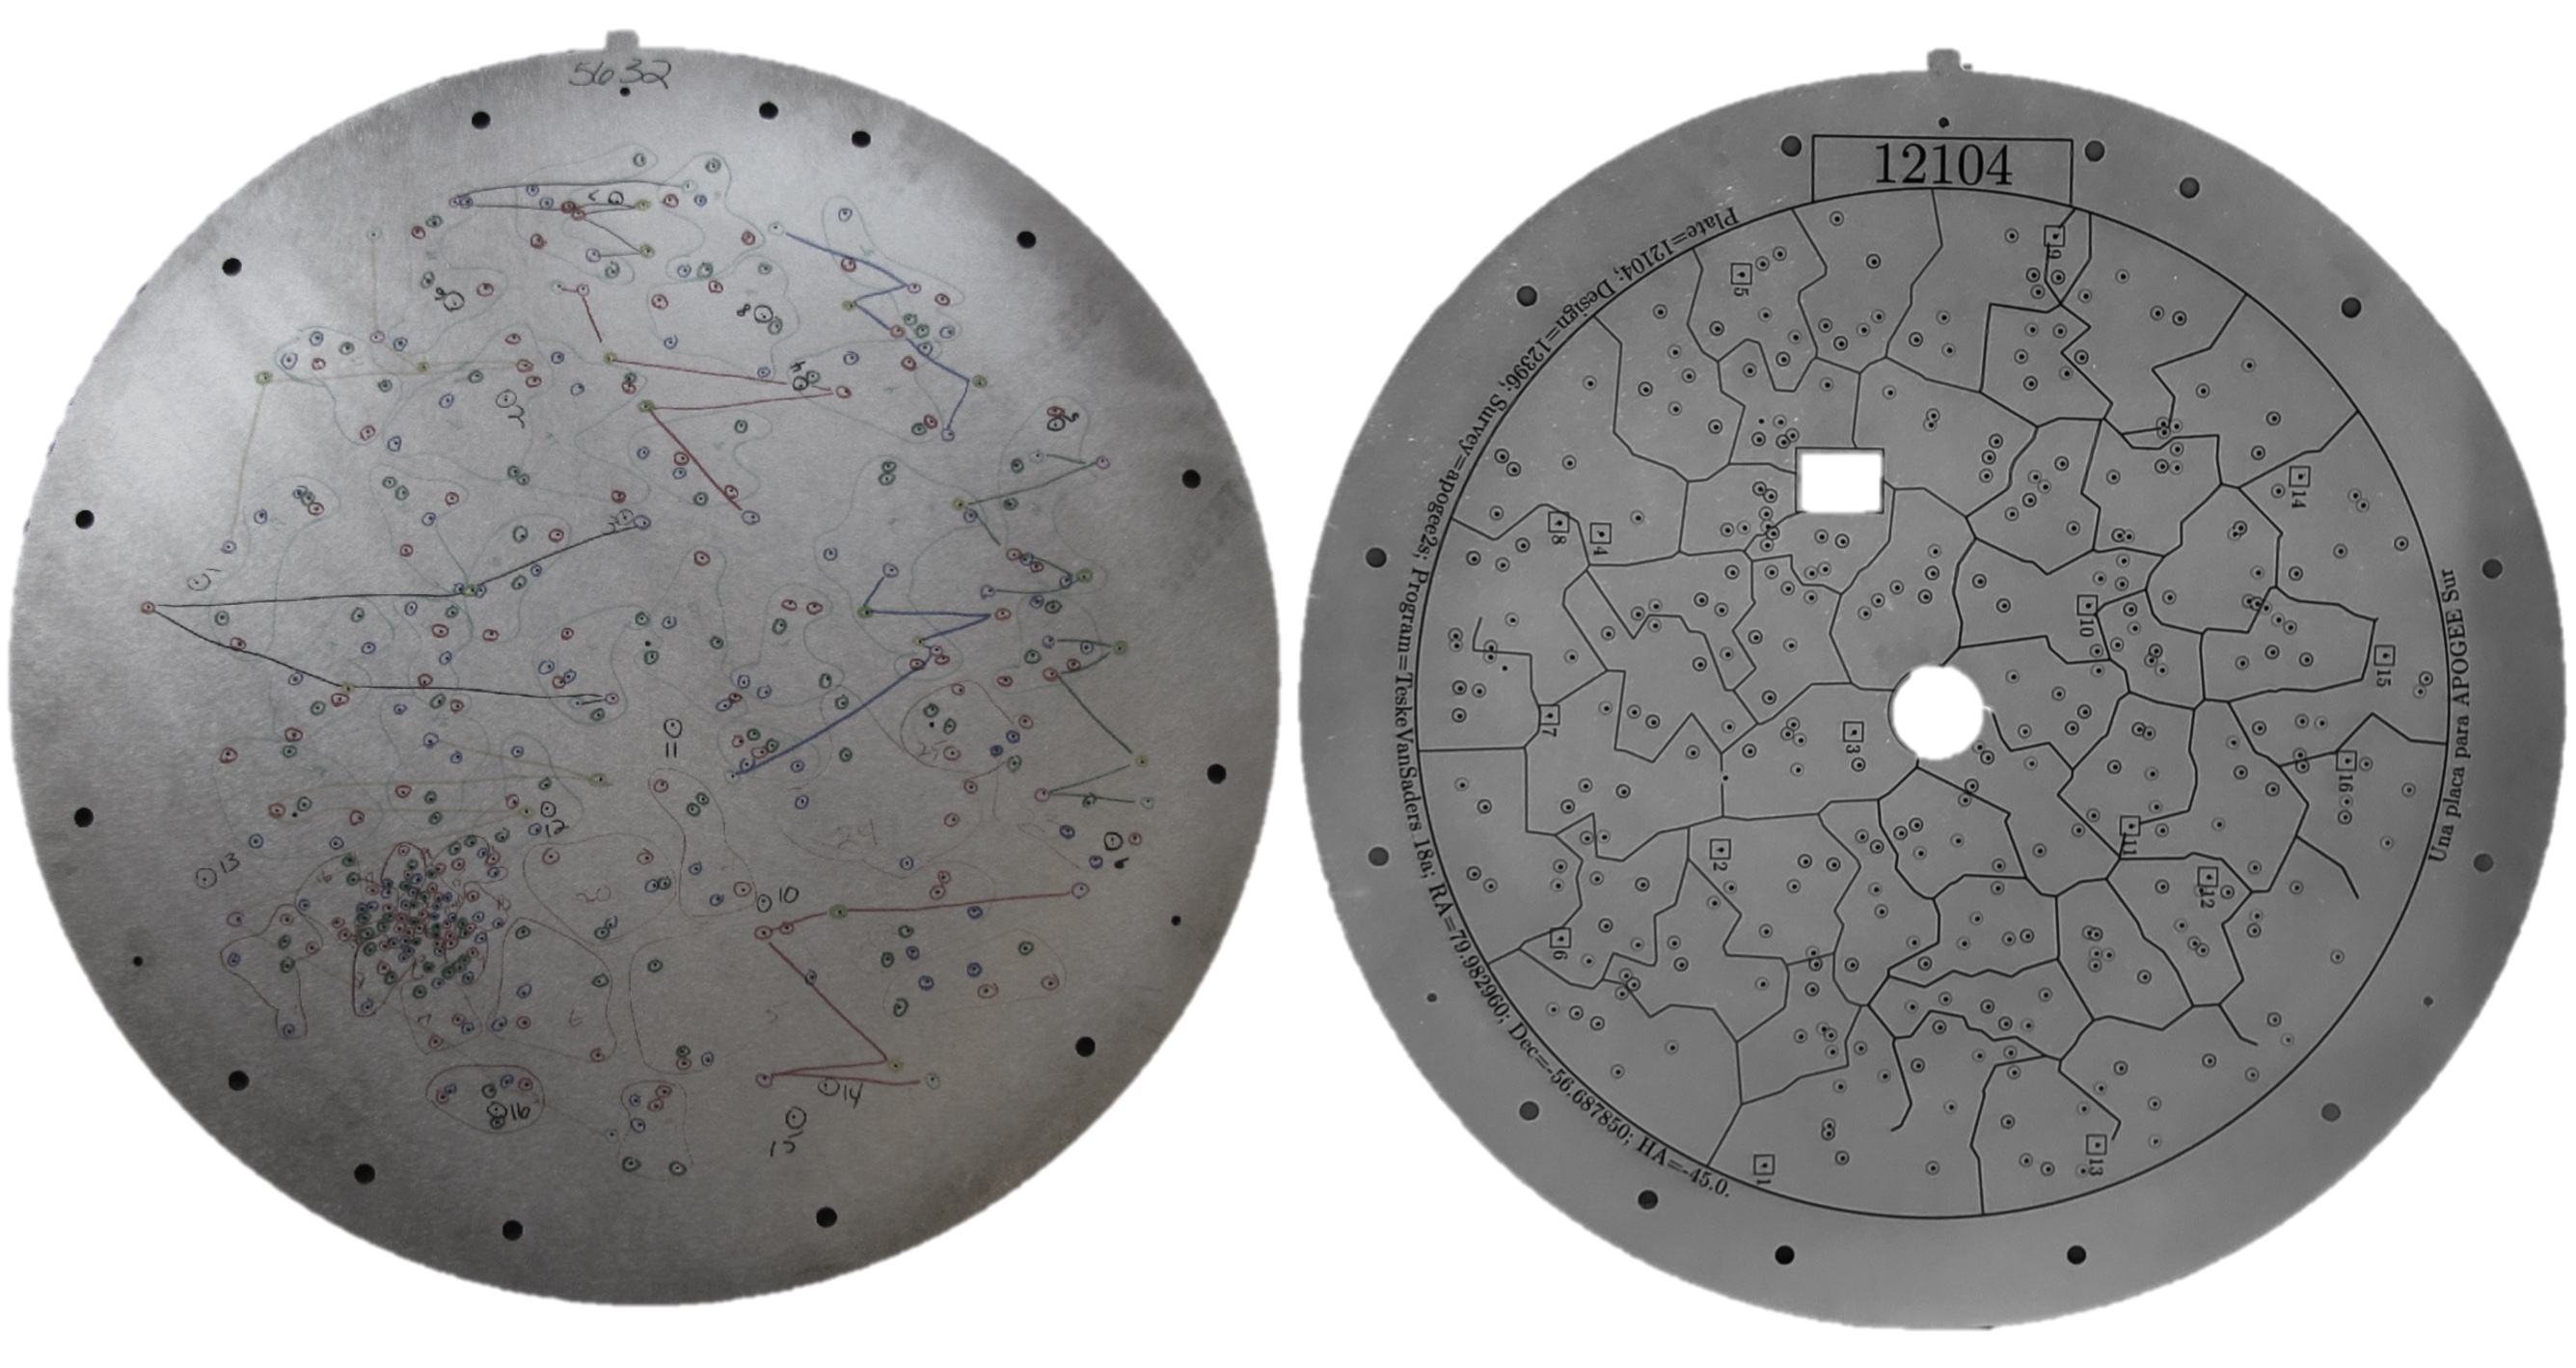 Comparison of plates used for the APOGEE-N instrument (left) and the APOGEE-S instrument (right).